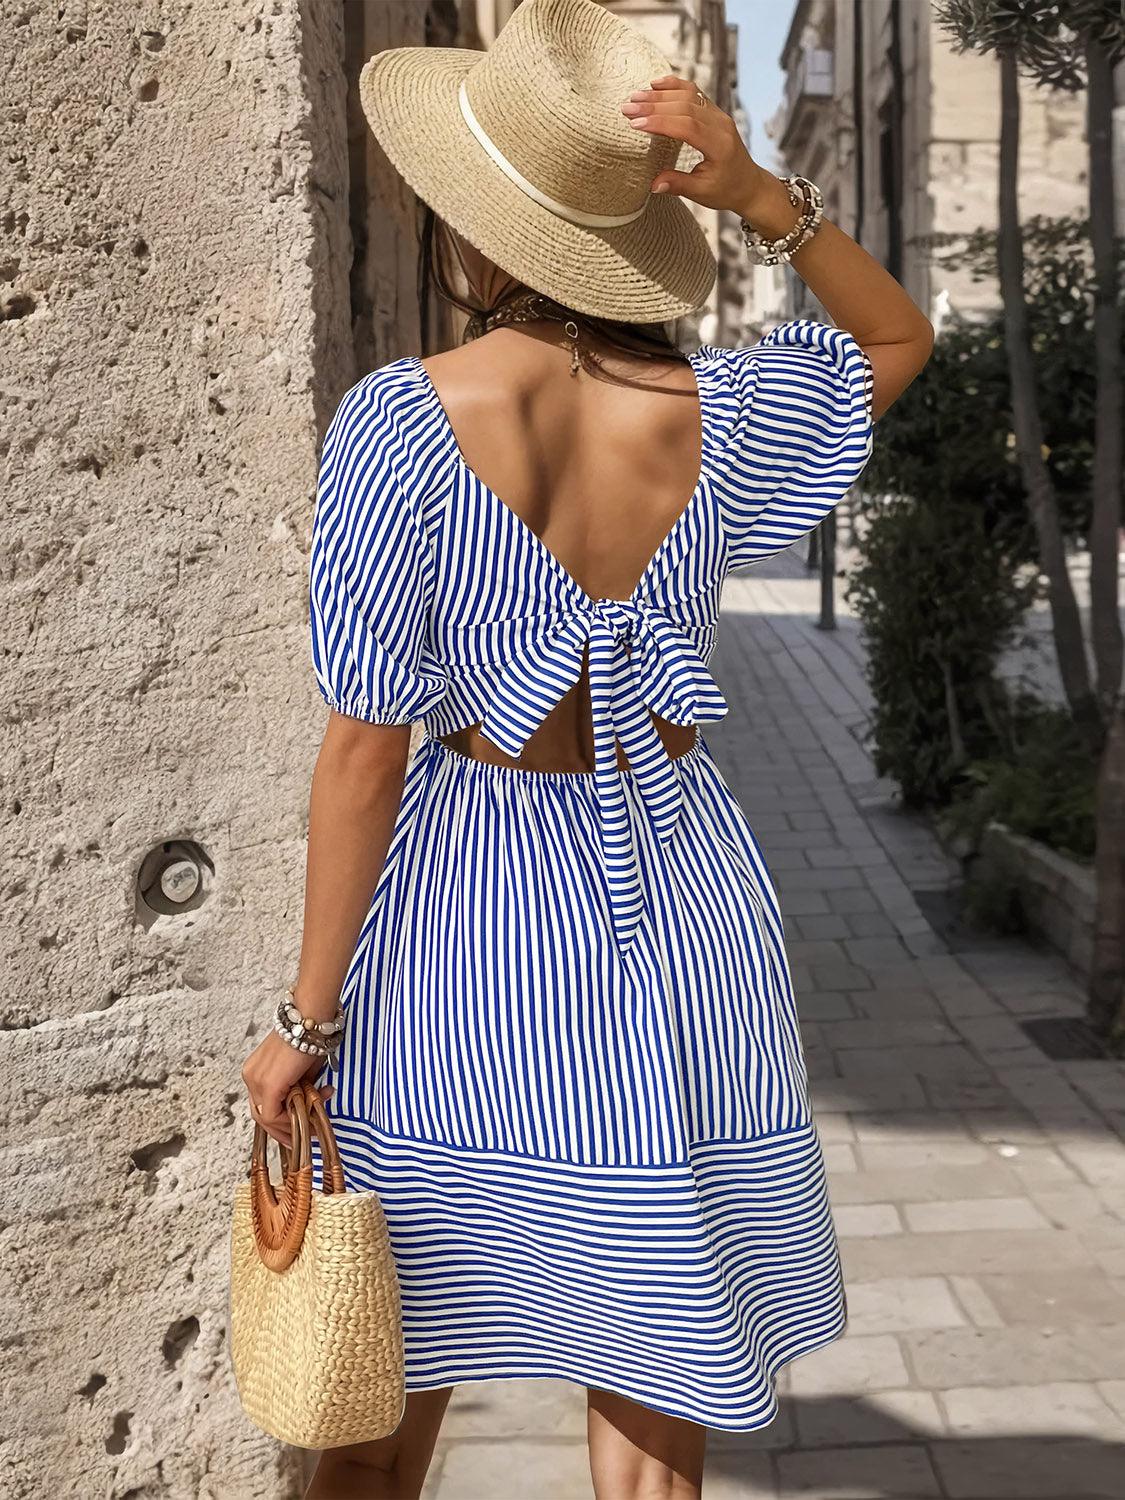 a woman wearing a blue and white striped dress and a straw hat